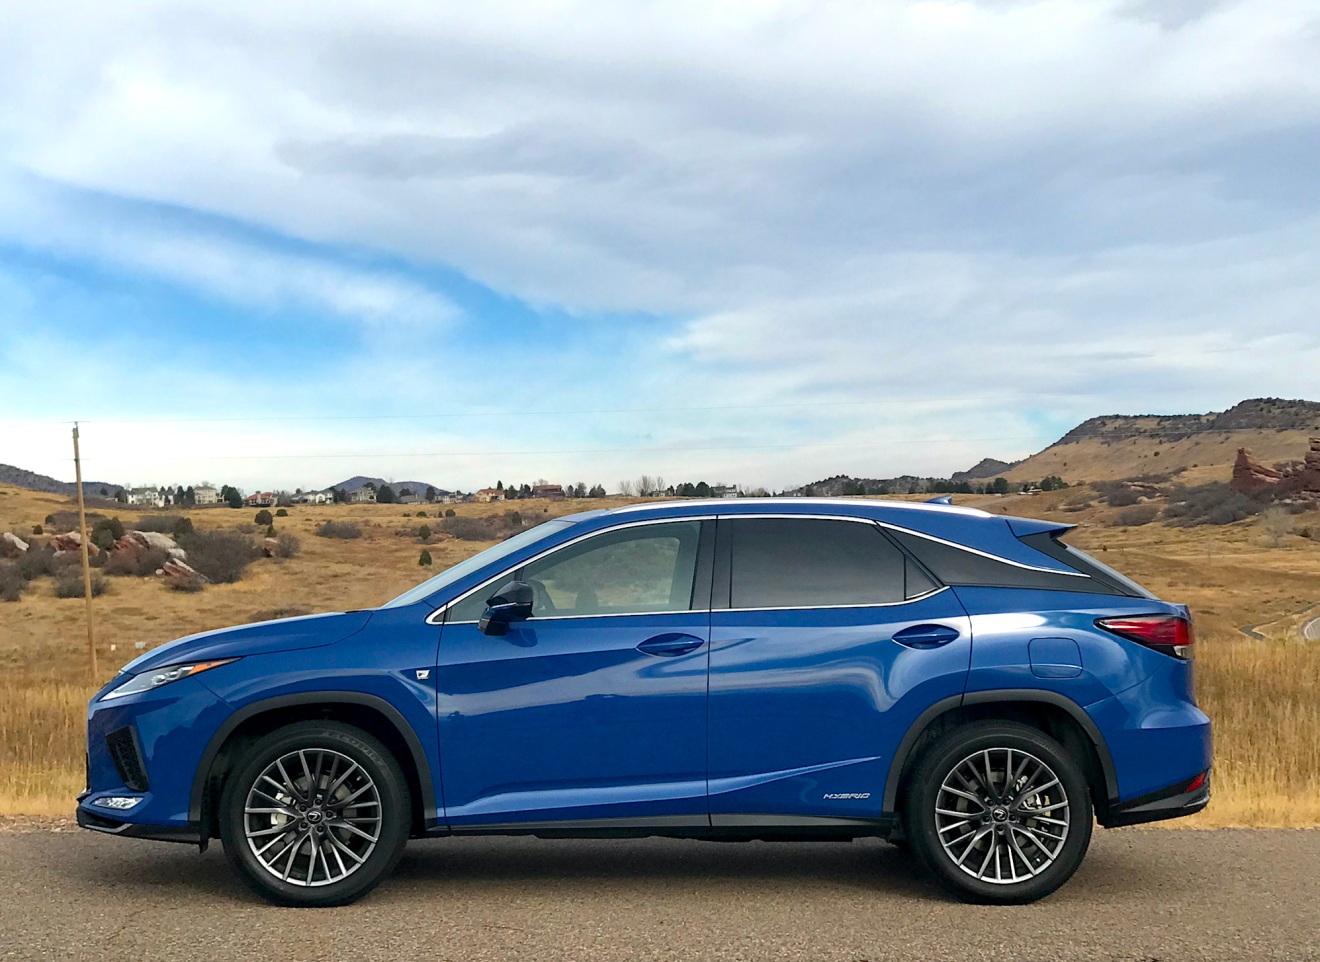 The 2022 Lexus RX 450h F Sport Handles Shockingly Well for a Hybrid SUV